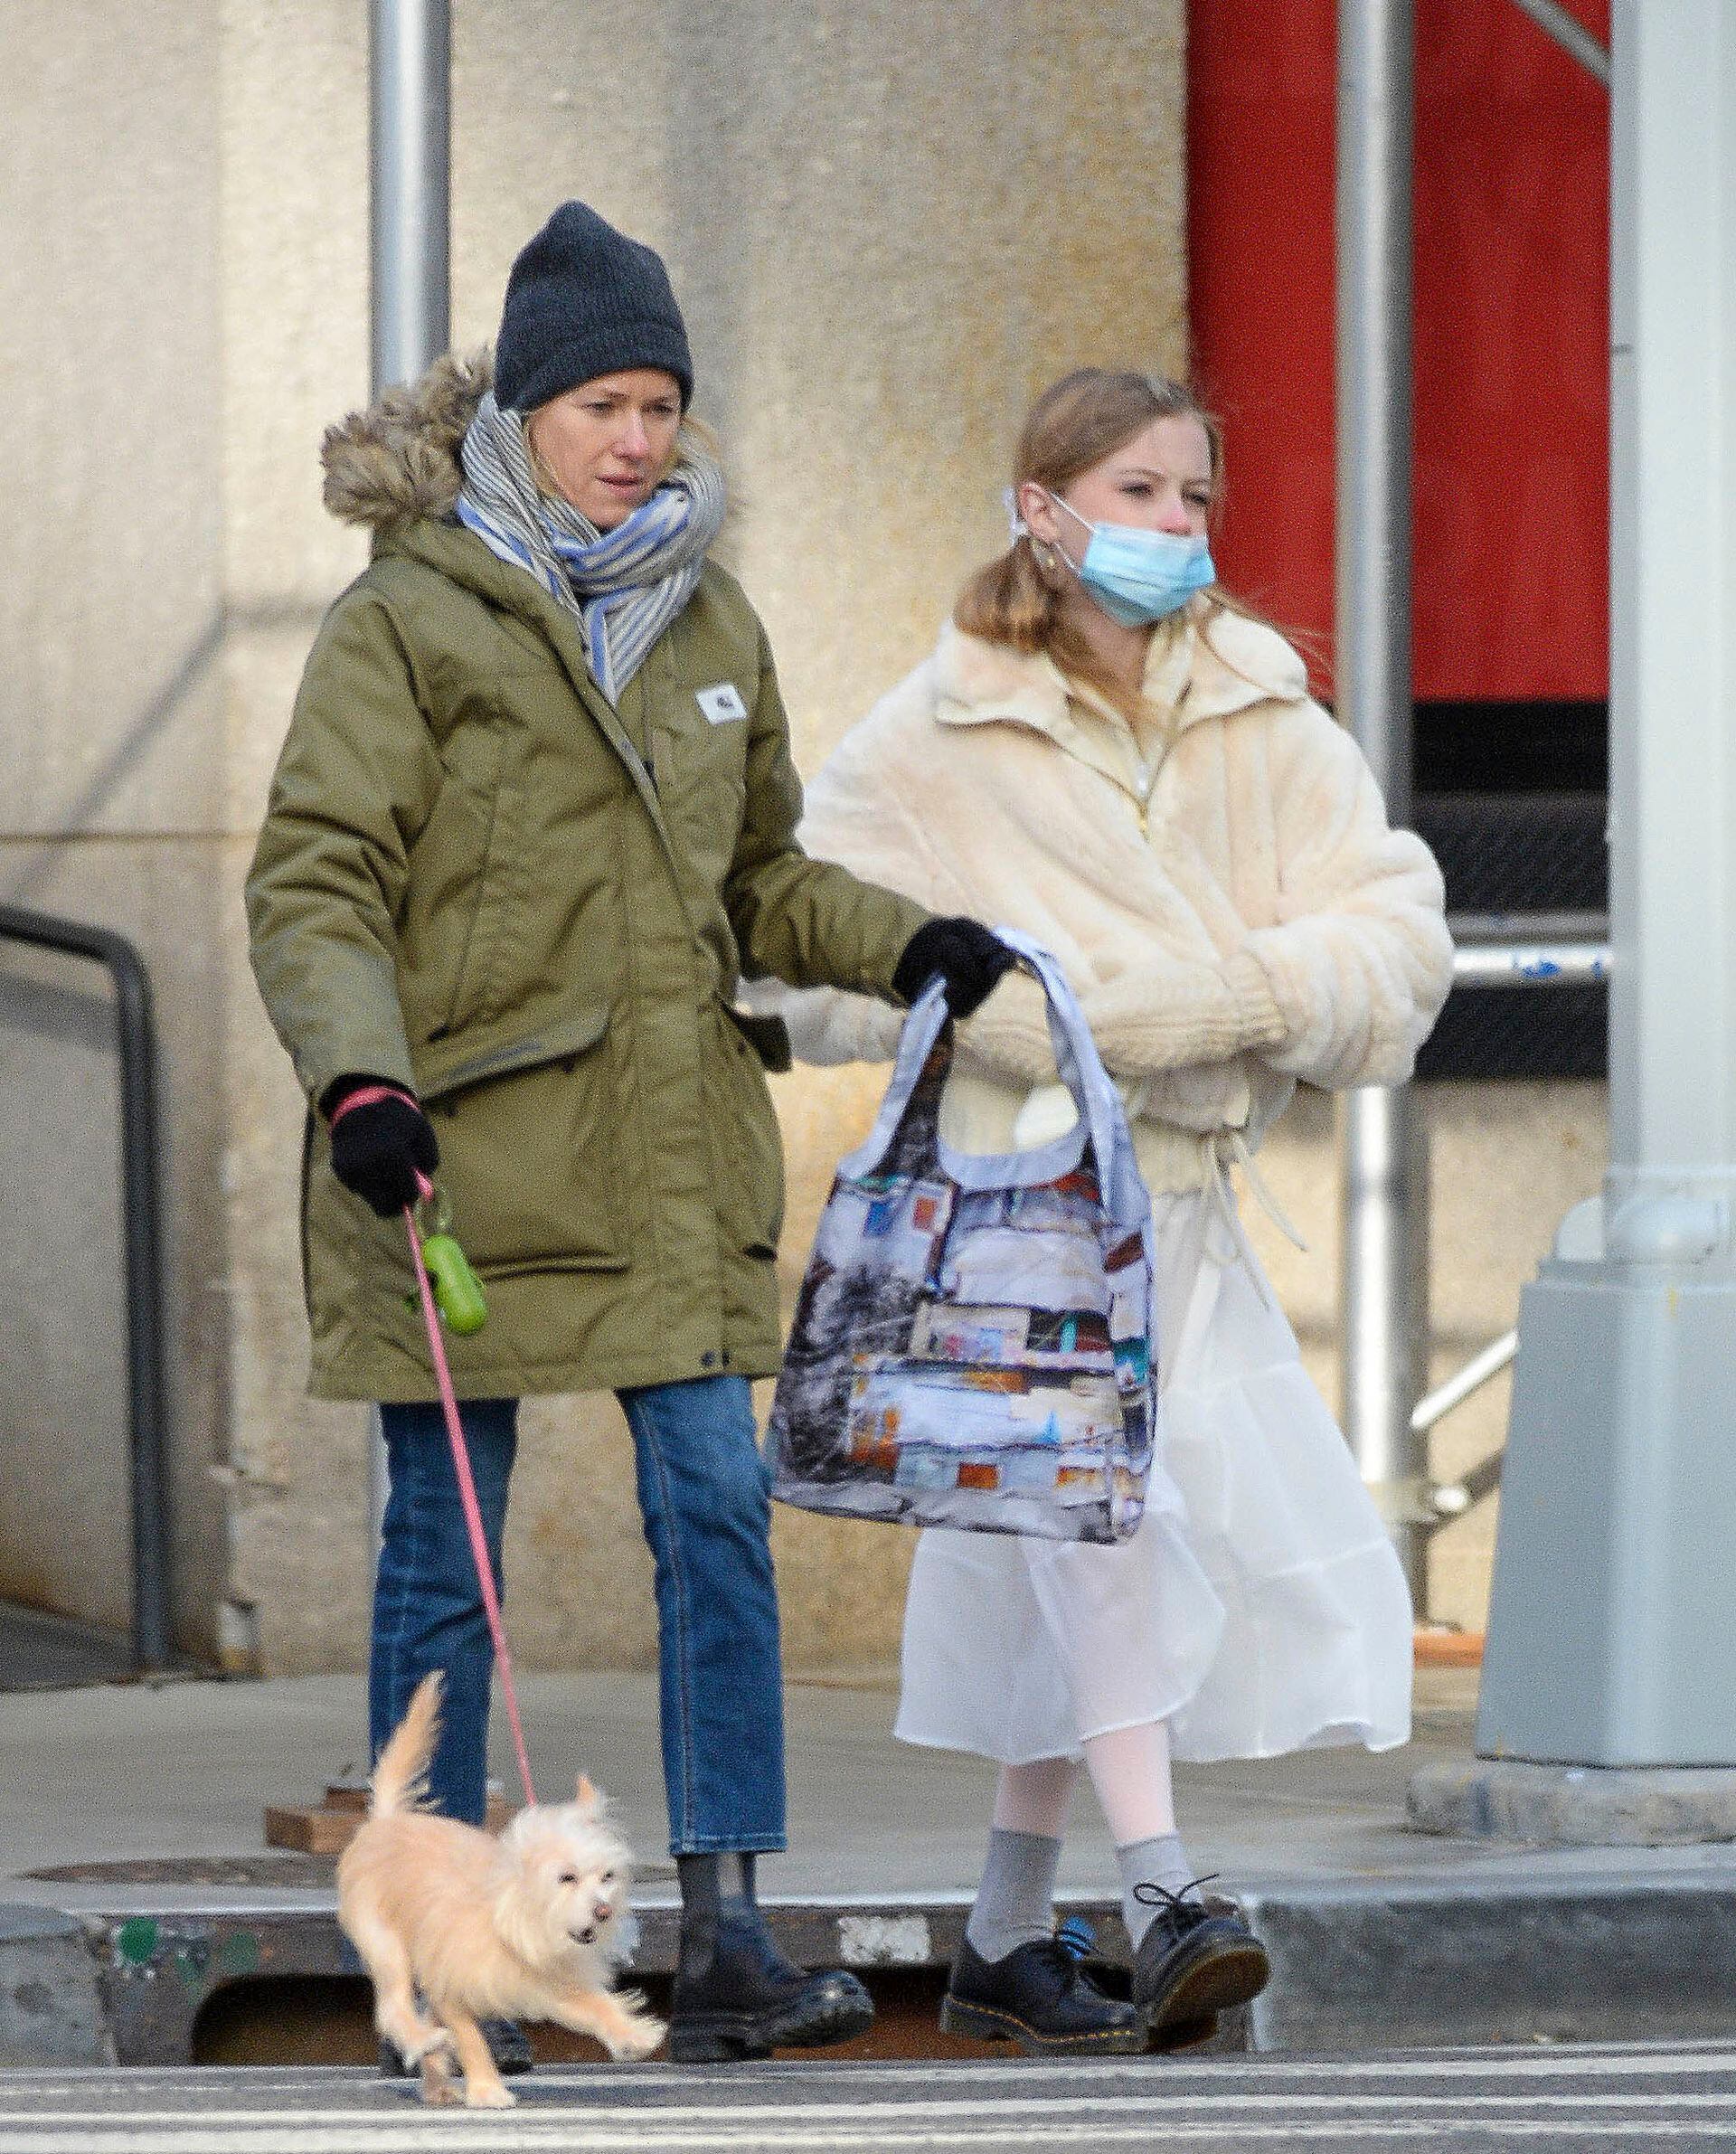 Naomi Watts, also on a walk in New York, with her daughter and her dog